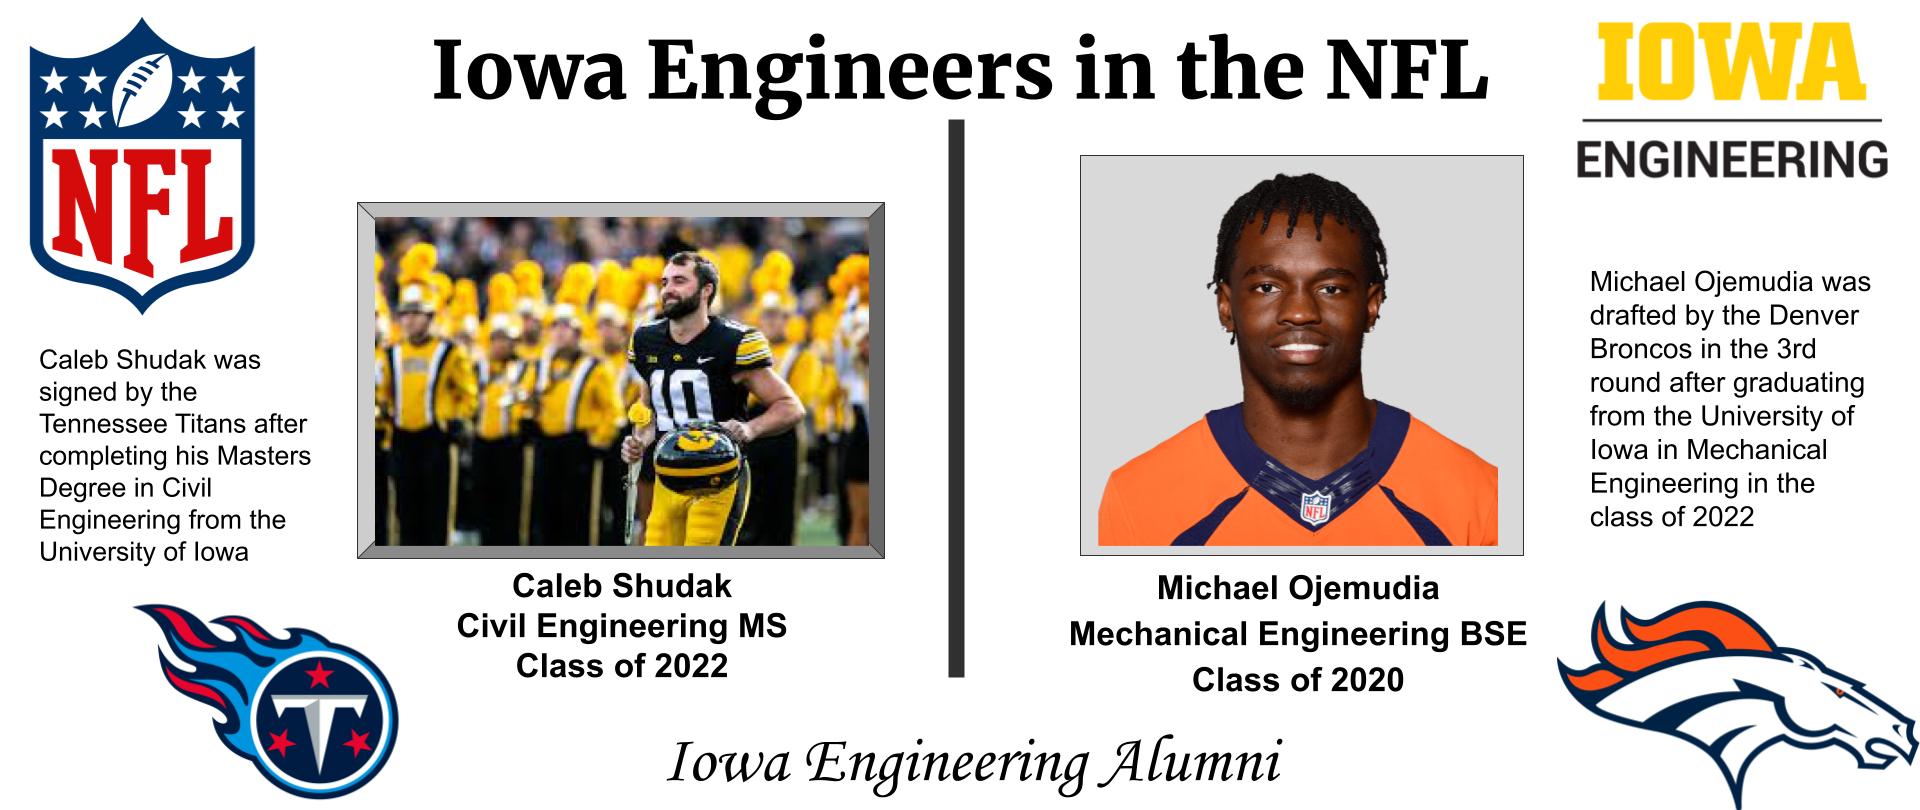 Iowa Engineers in the NFL